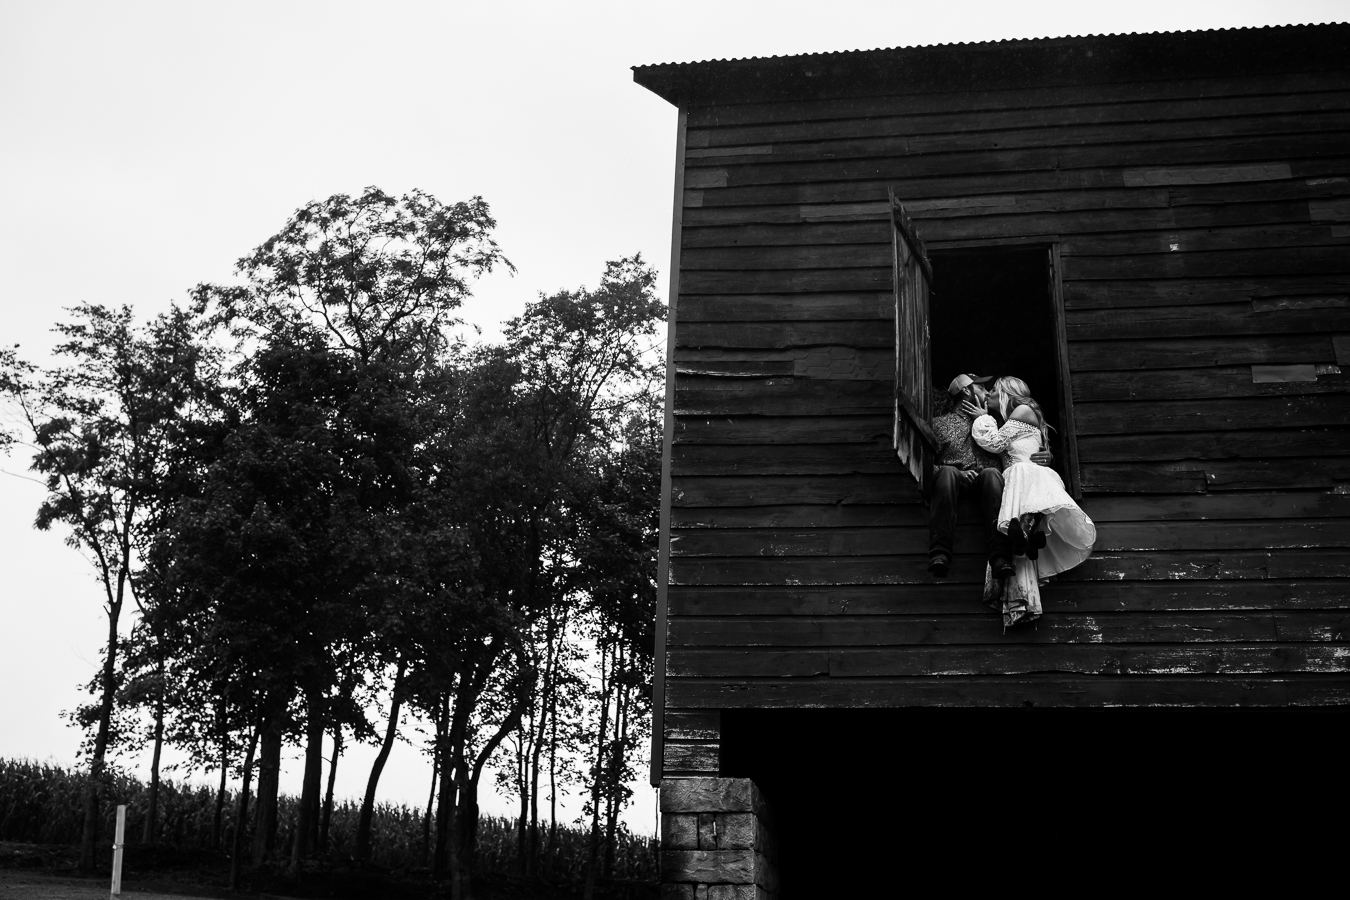 best pa wedding photographer, lisa rhinehart, captures this fun, unique, creative image of the bride and groom as they kiss in the hayloft of the barn during this country wedding